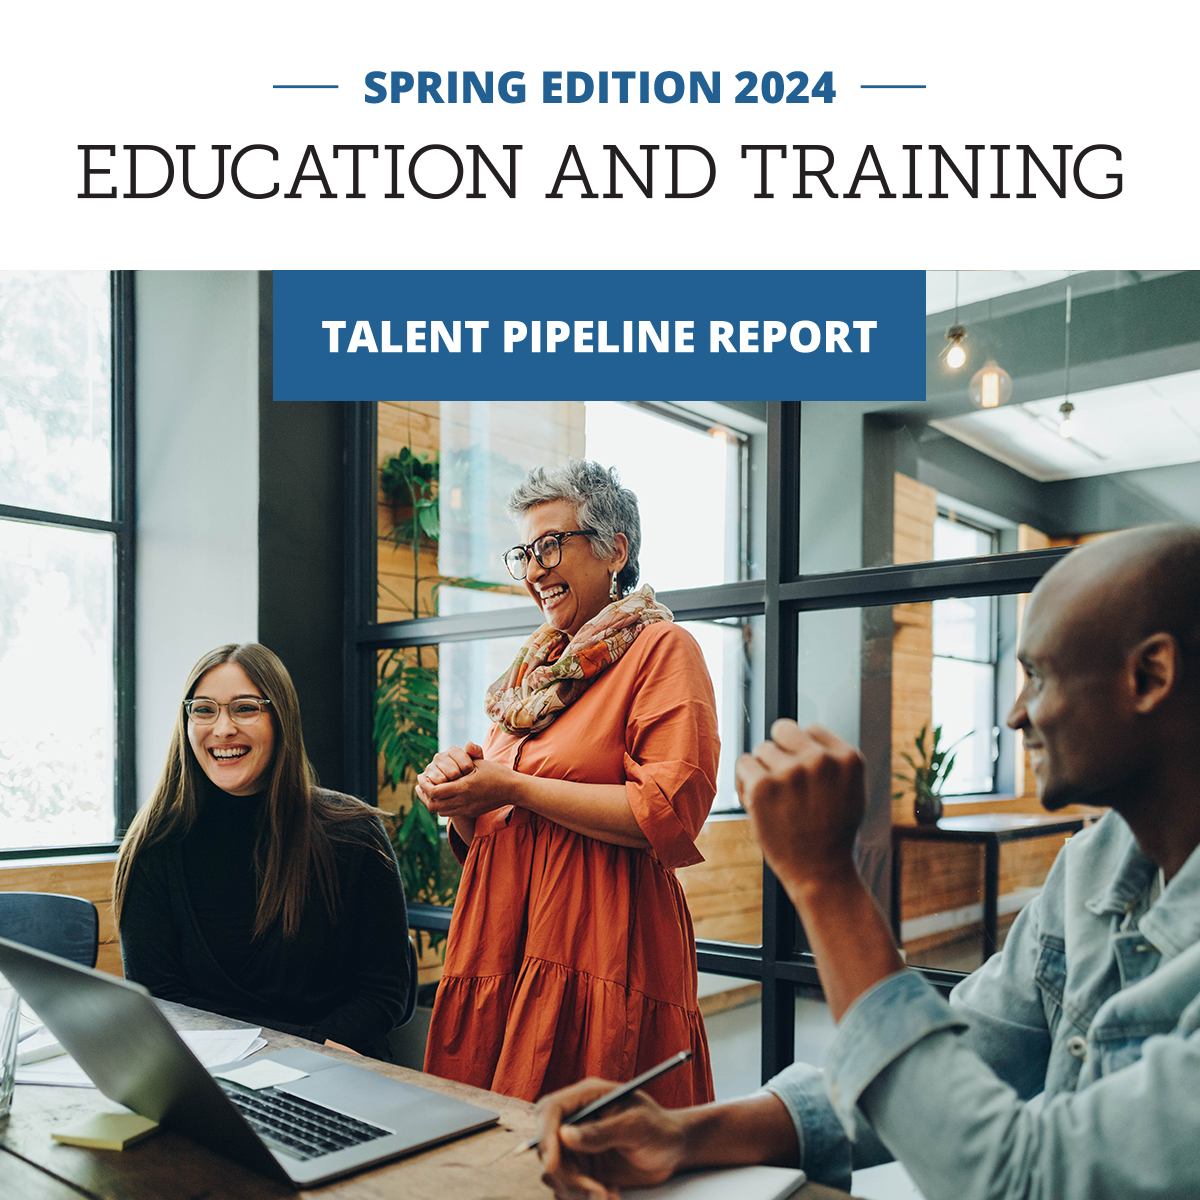 The first Talent Pipeline Report Spring Edition has been published by @the_cwdc and @CoHigherEd. This first complementary edition to the full report focuses on #education and #training. Learn more: cwdc.colorado.gov/blog-post/firs…